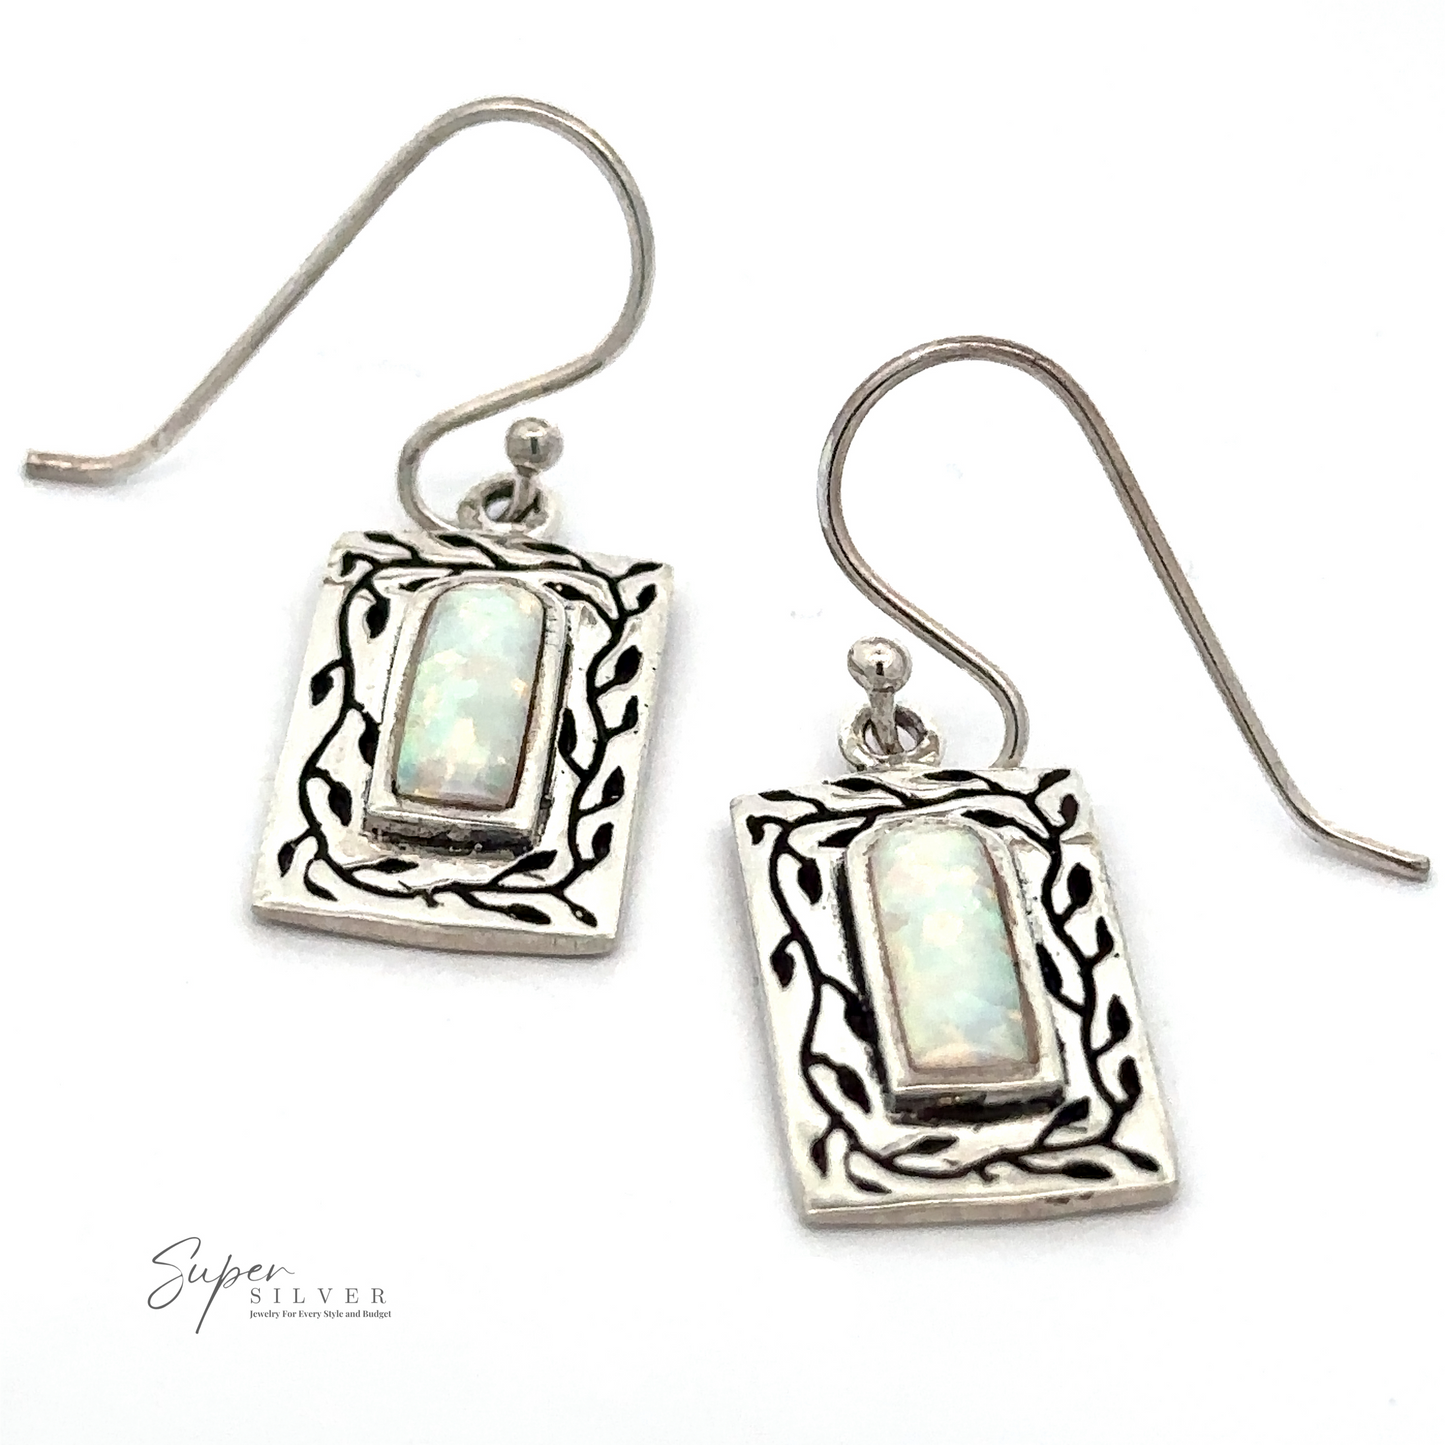 A pair of White Created Opal Square Earrings with intricate silver detailing and hook-style backs. The background is white, and the text "Super Silver" is visible in the lower left corner.